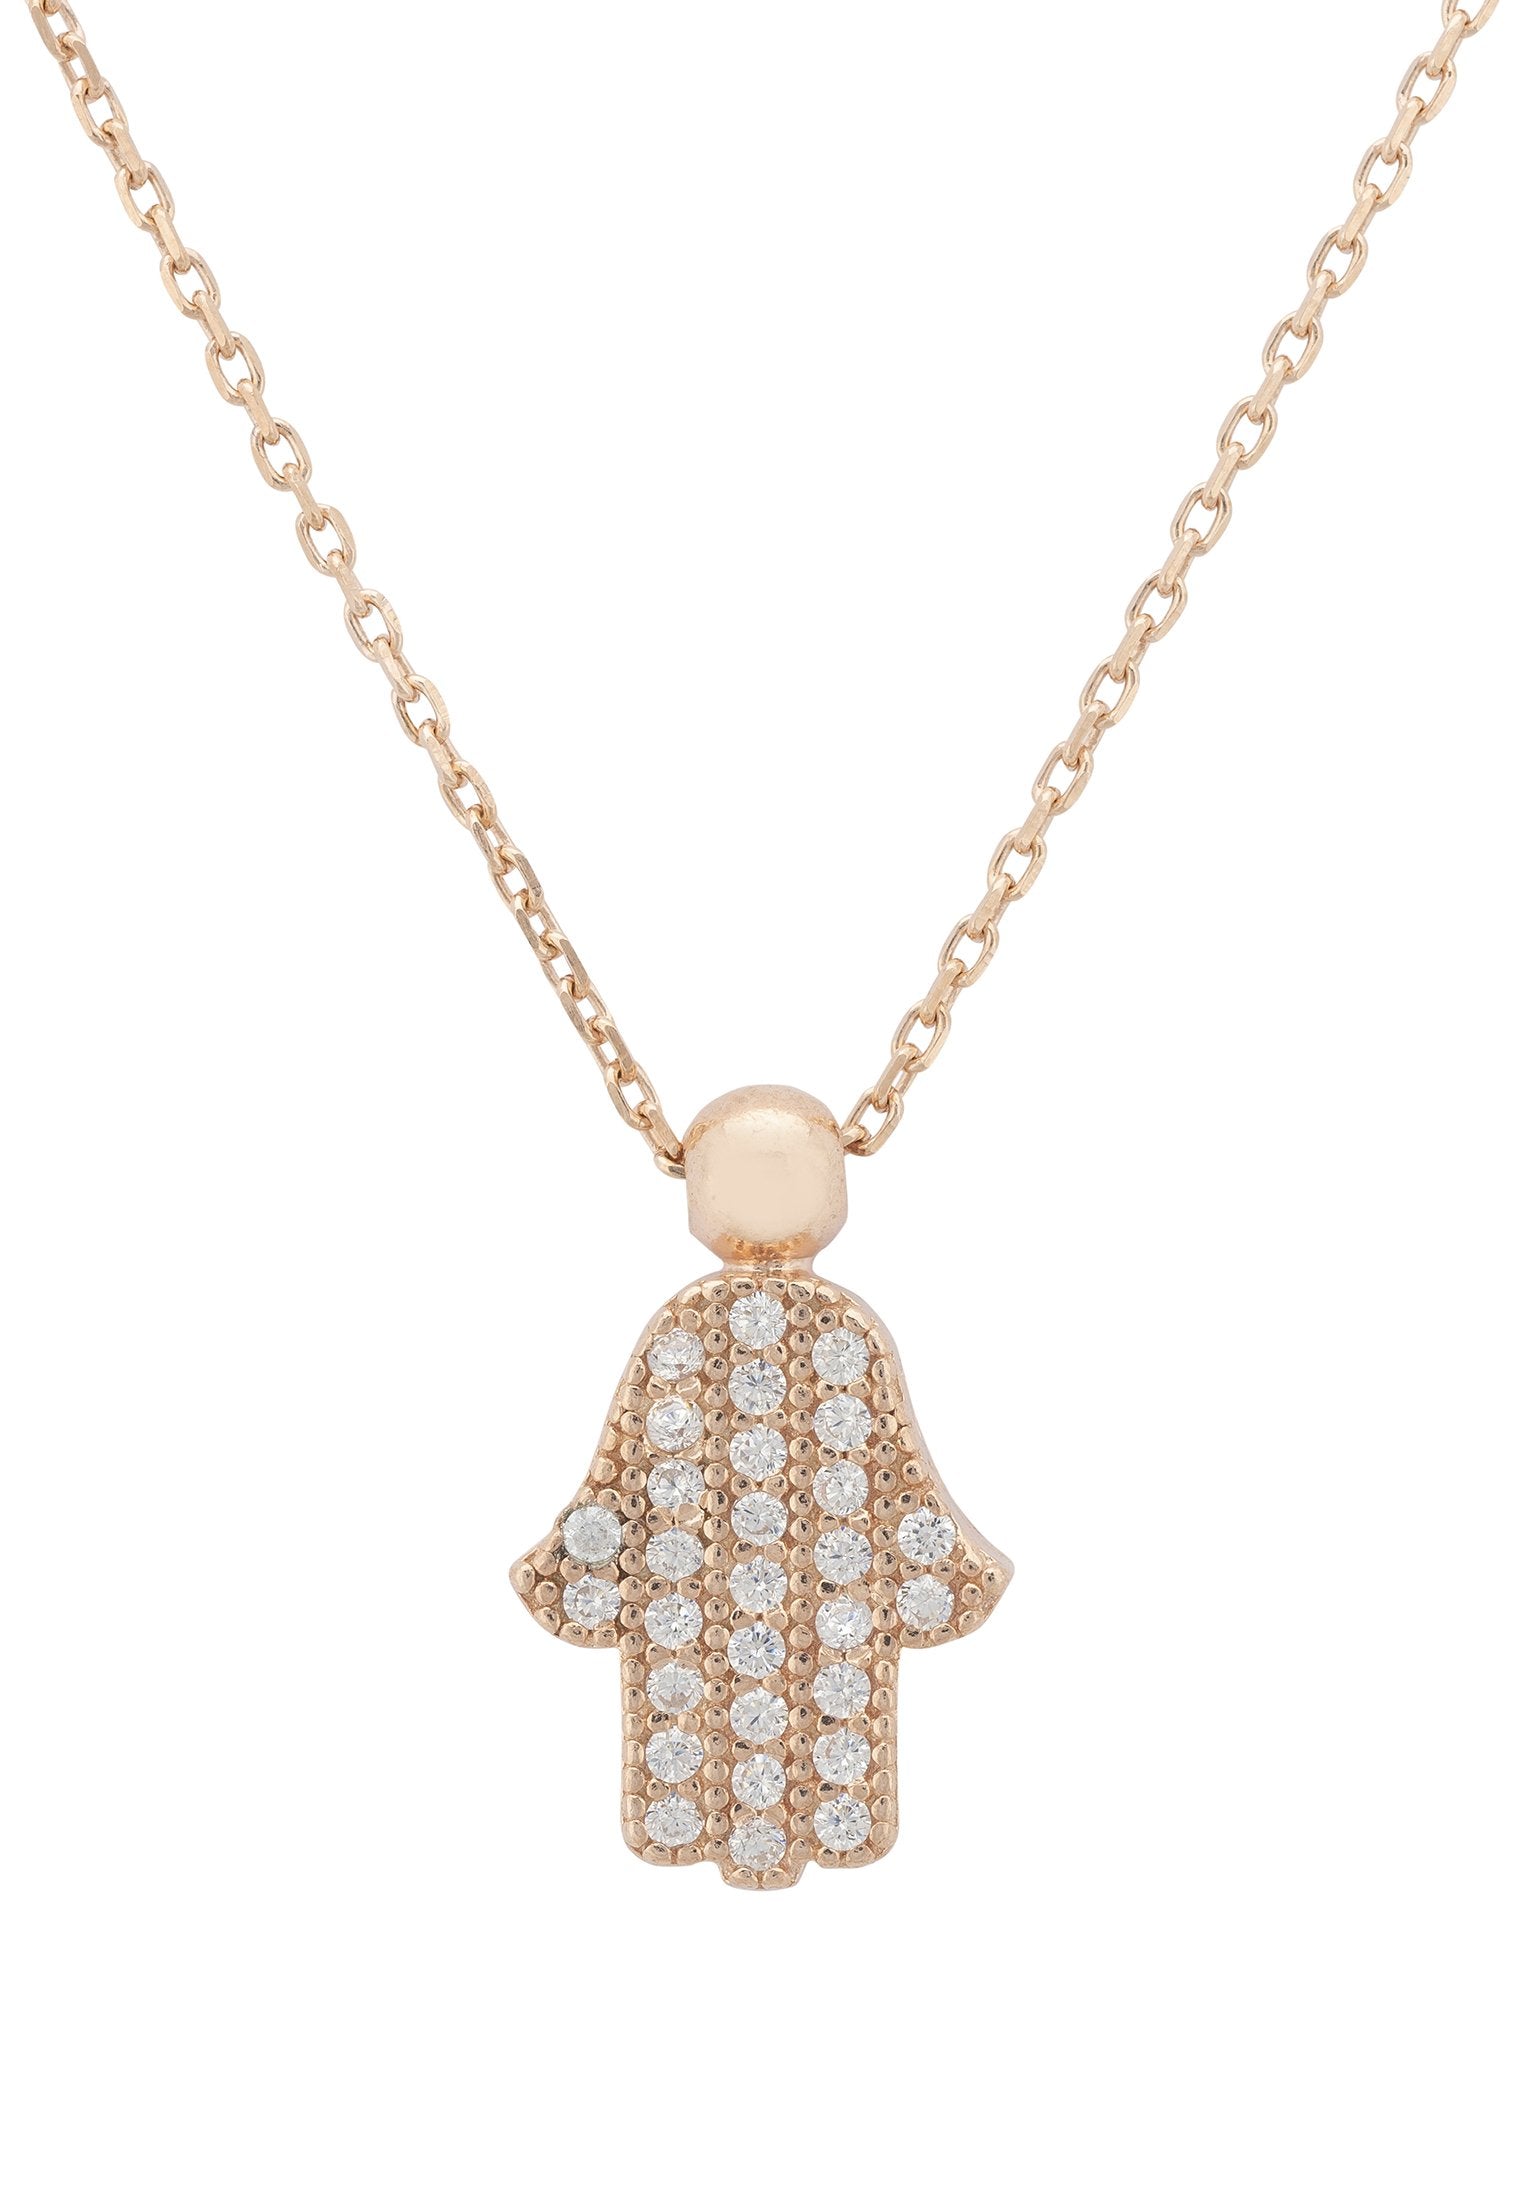 Hamsa Hand Charm Pendant Necklace Rose Gold Plated